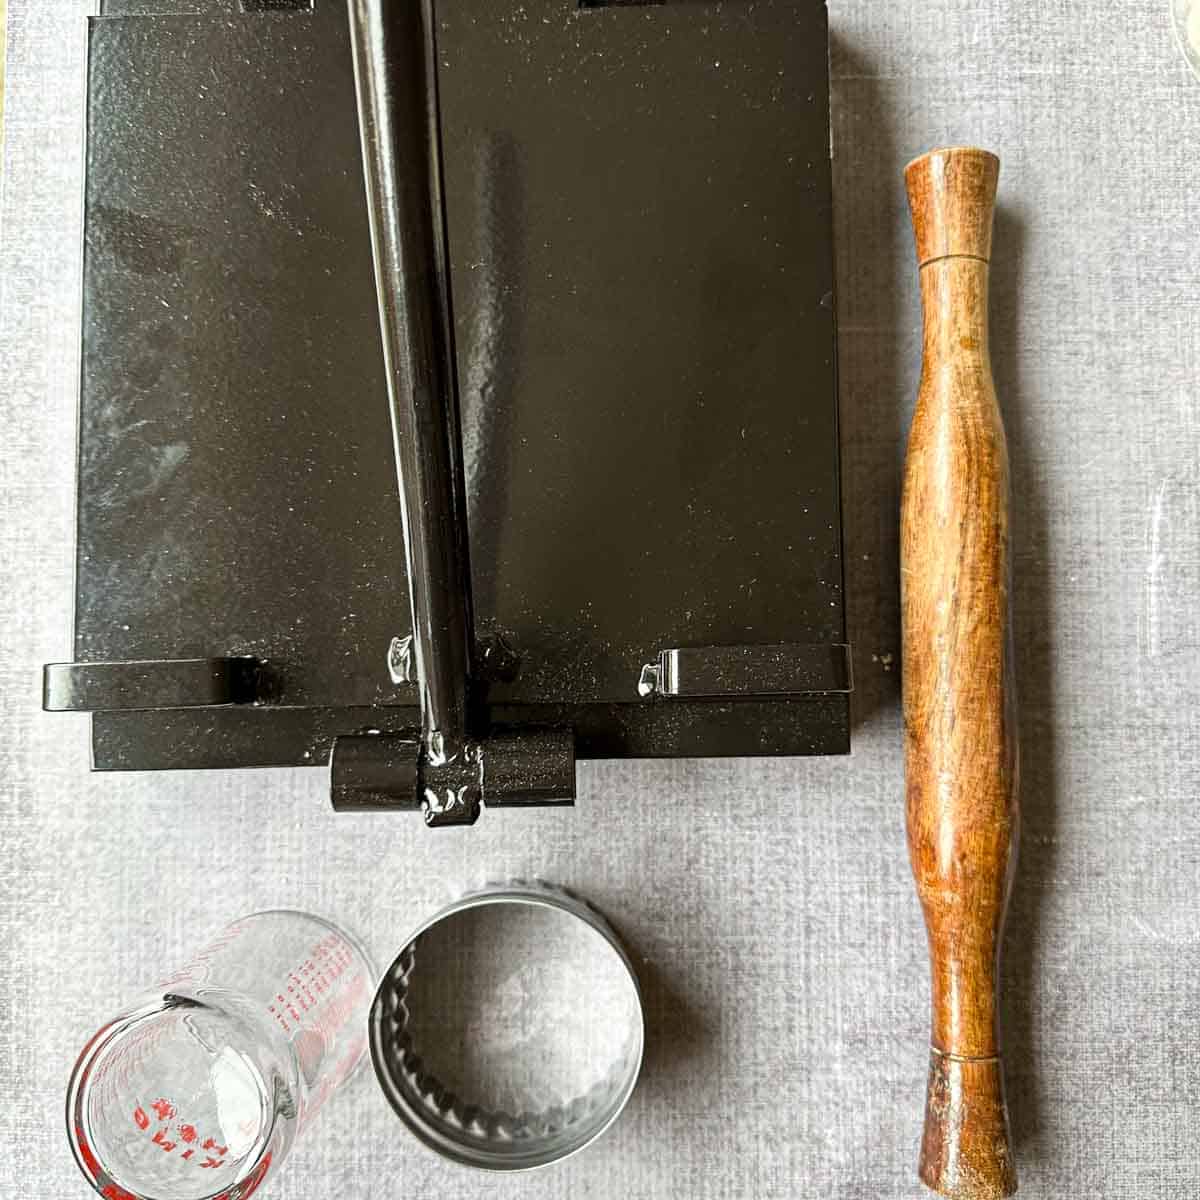 Picture depicting tools for rolling techniques for pani puri. It shows a tortilla press, a cookie cutter, a shot glass as alternative for cookie cutter, and a rolling pin